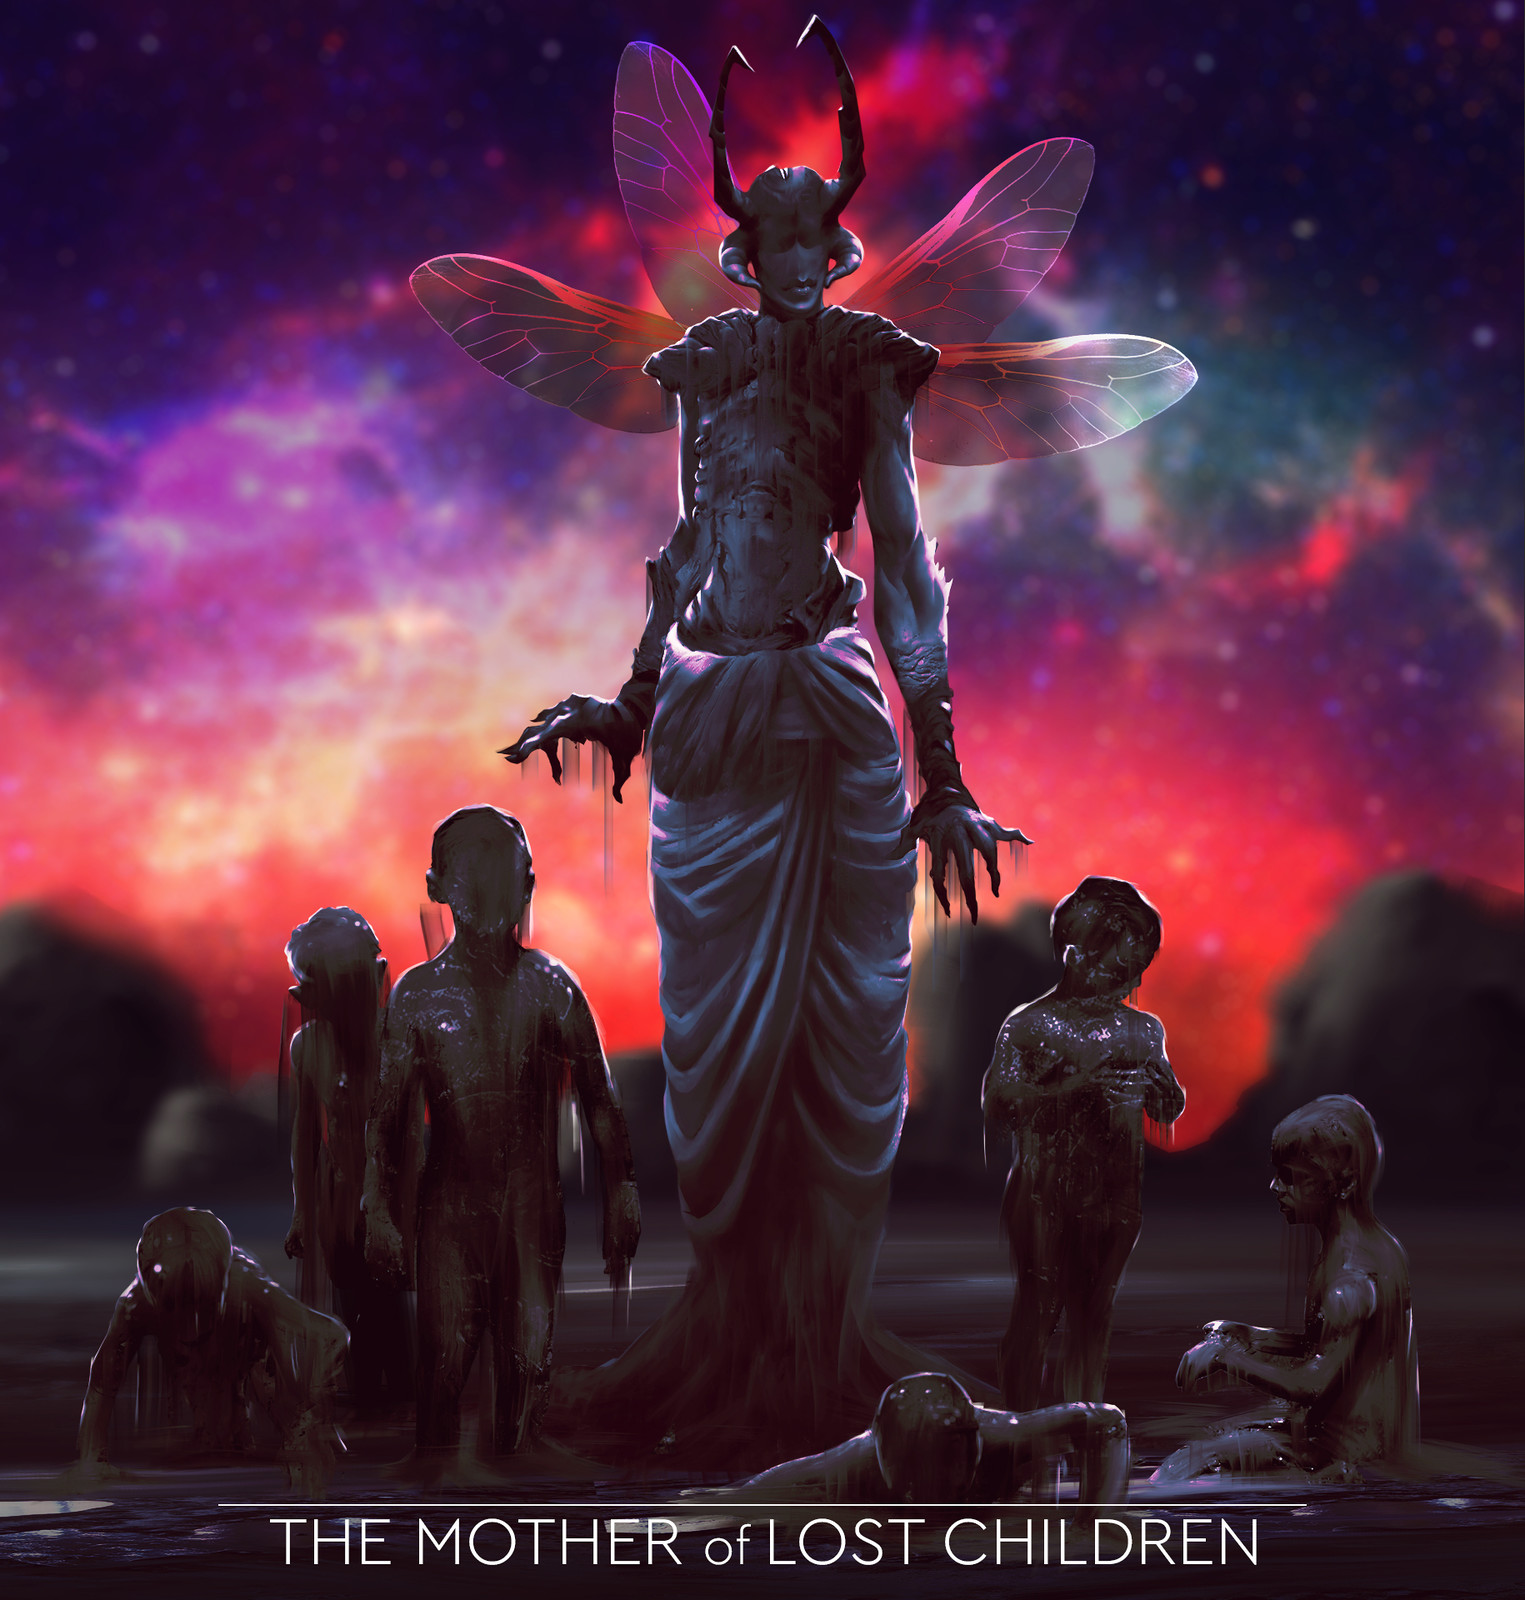 The Mother of Lost Children